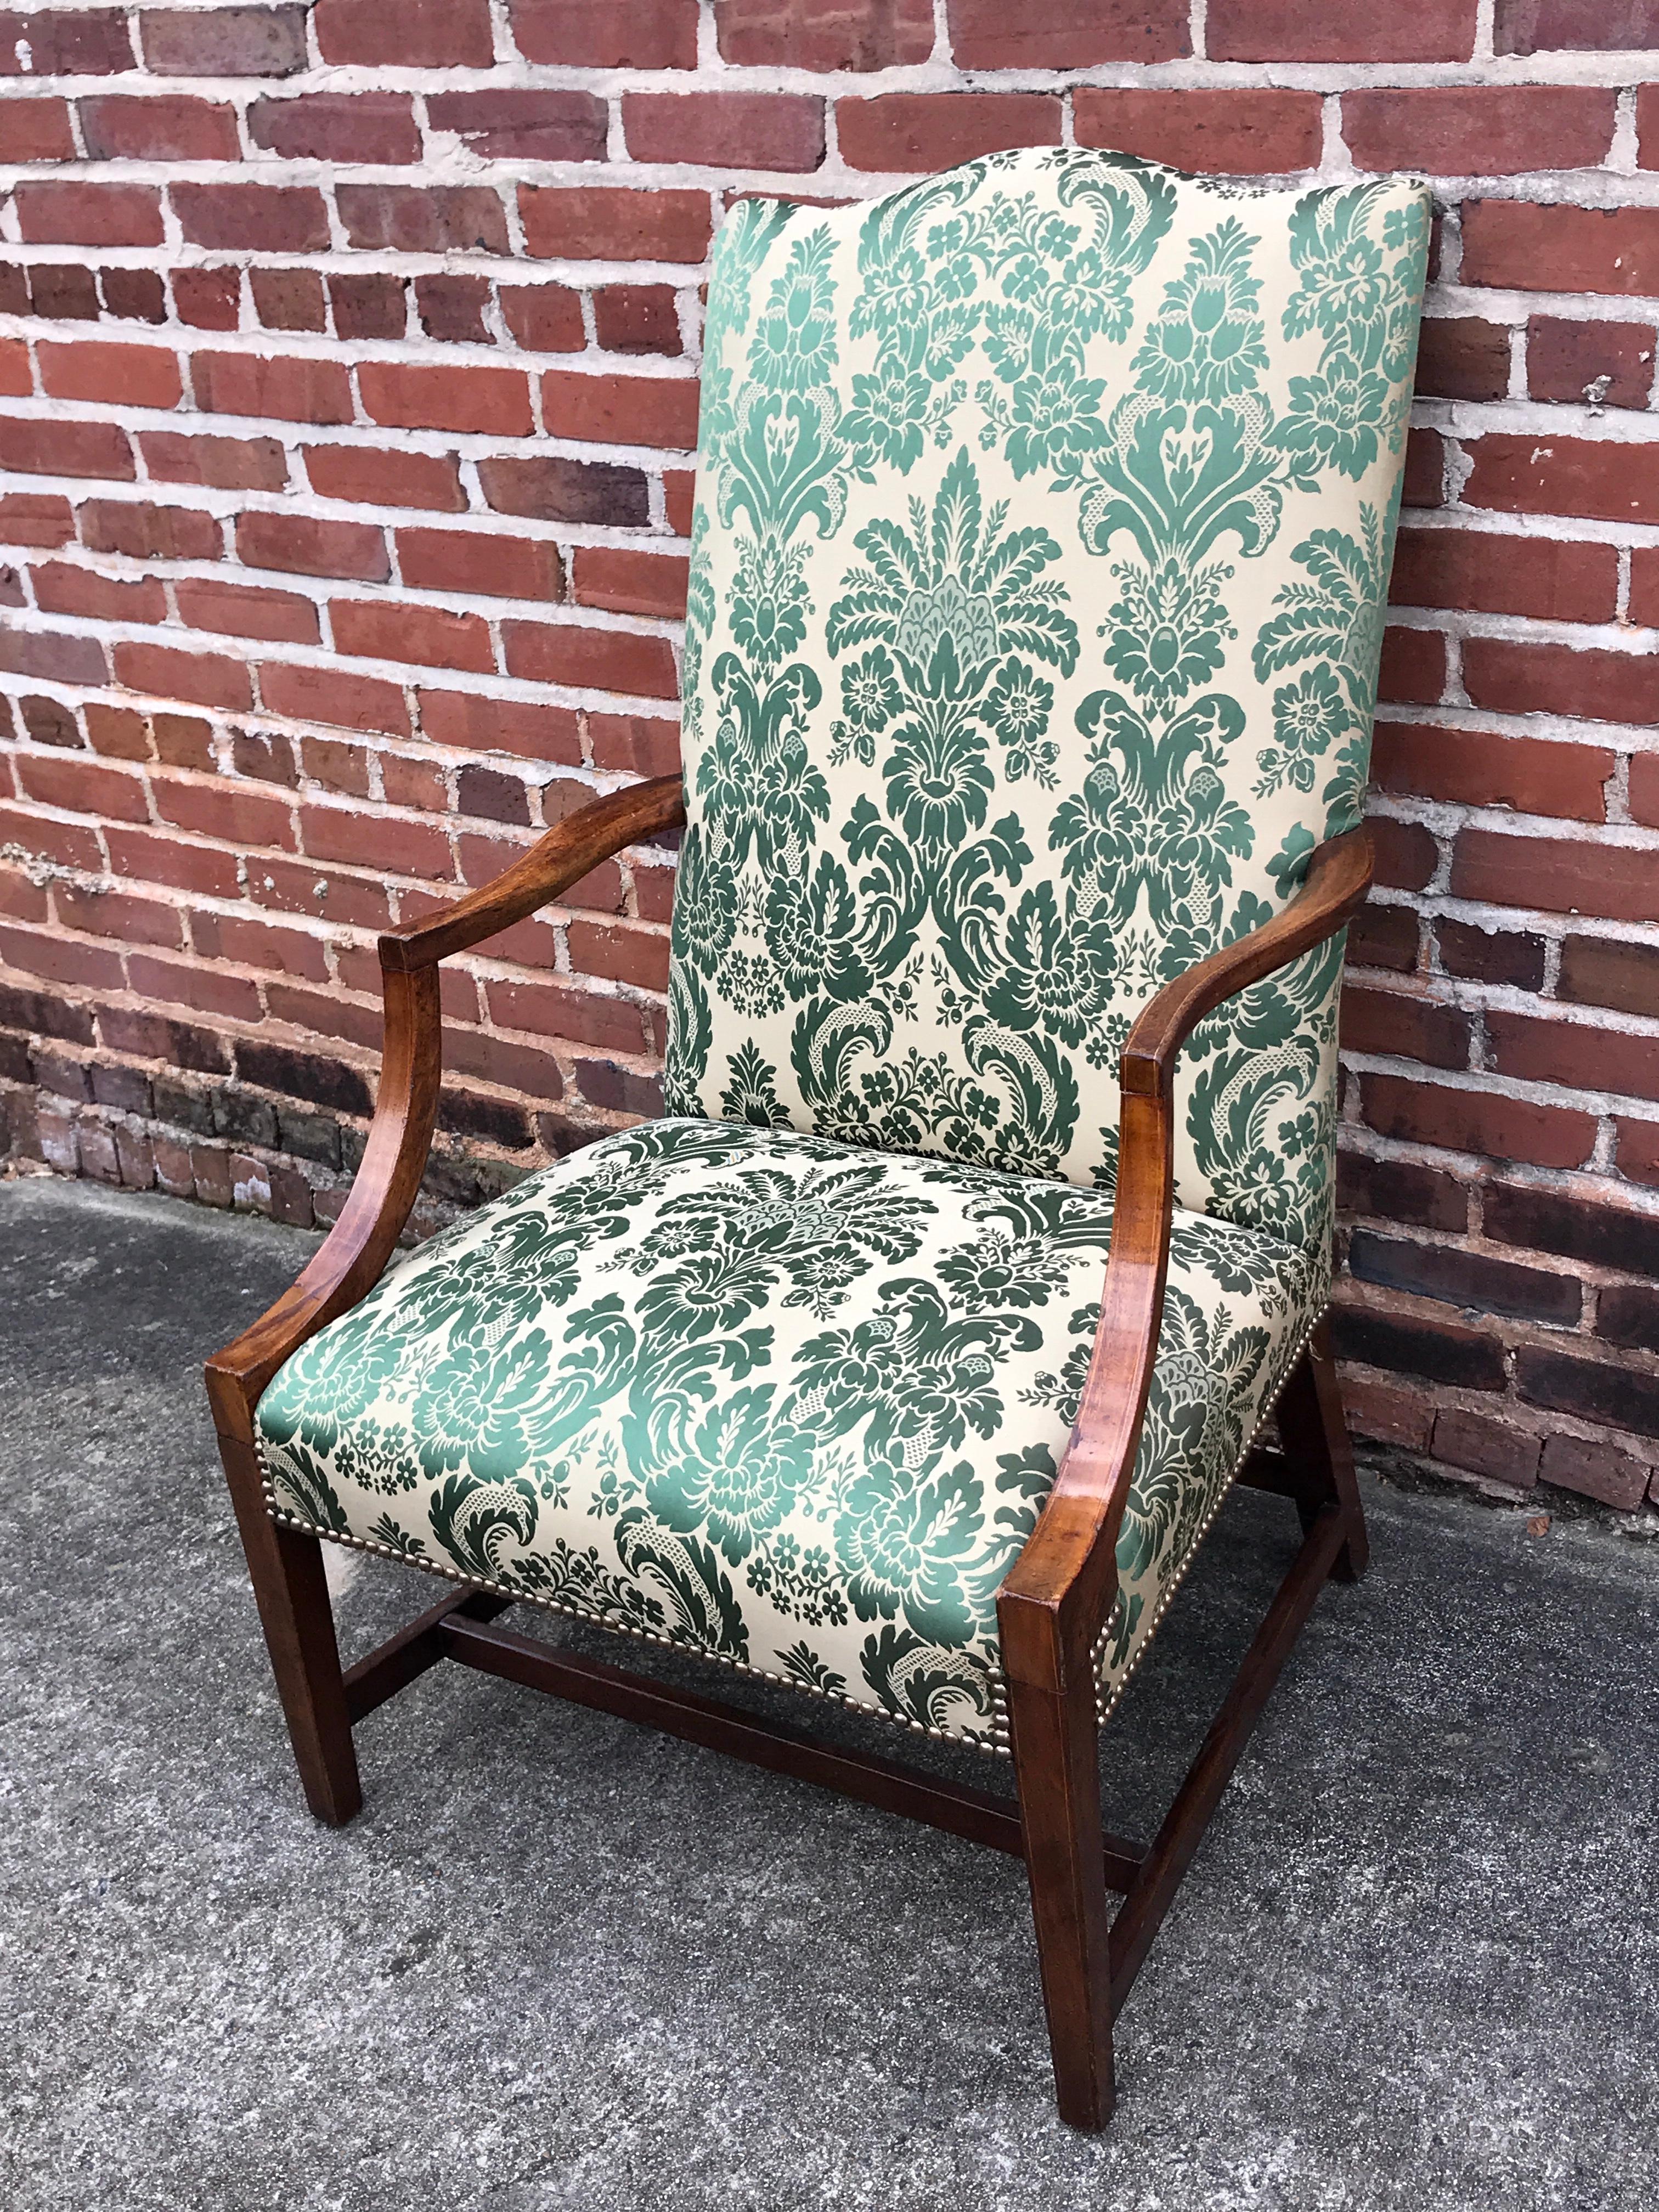 19th Century American Hepplewhite Lolling Chair, MA or NH